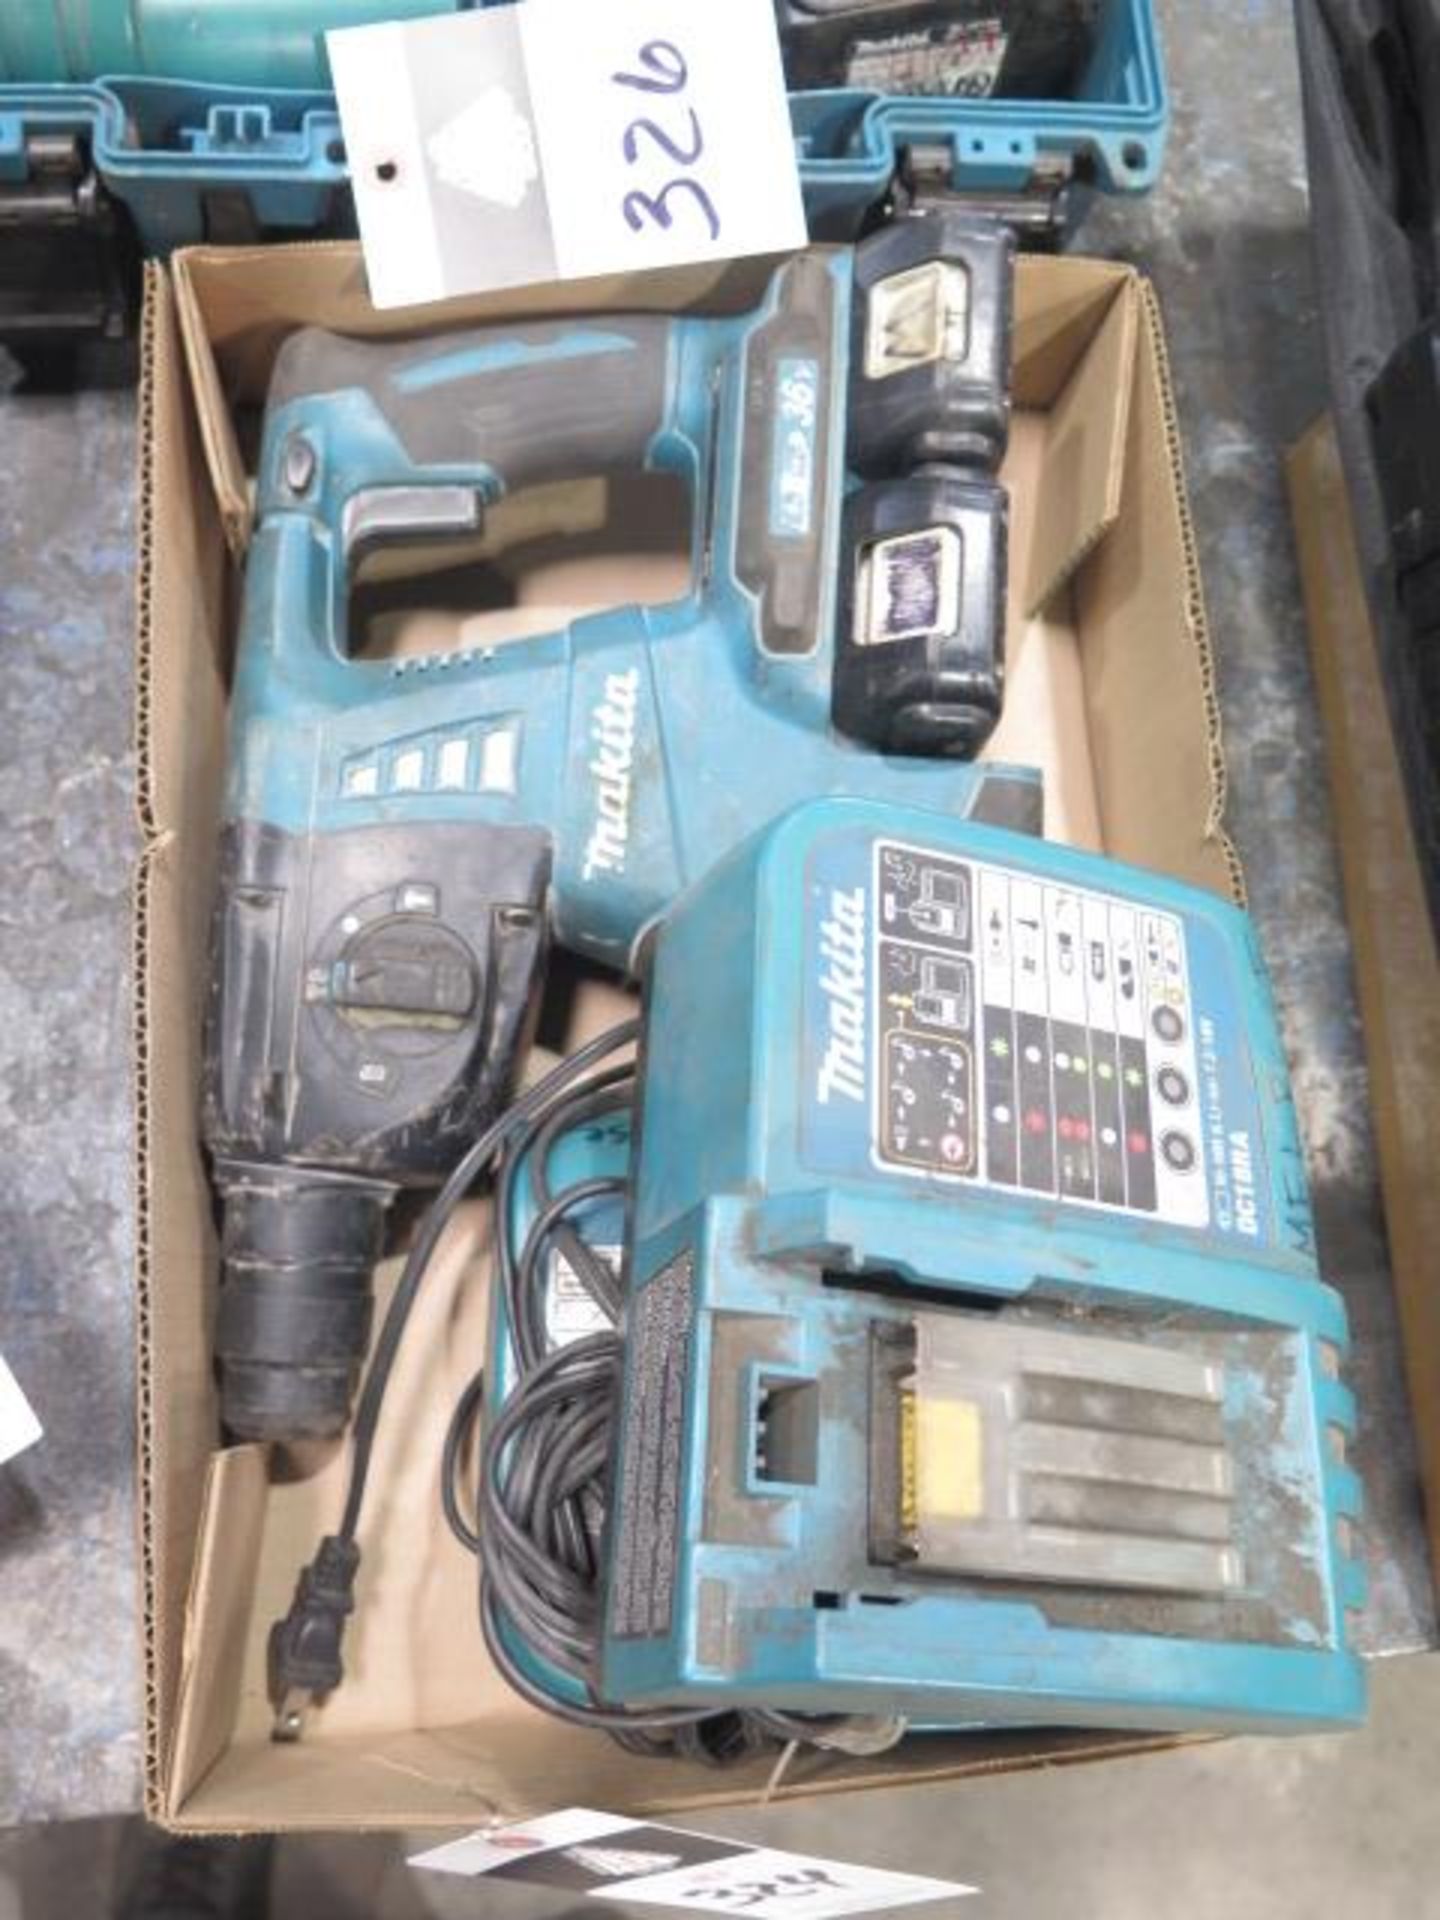 Makita 36V Cordless Hammer Drill w/ Charger (SOLD AS-IS - NO WARRANTY) - Image 2 of 5